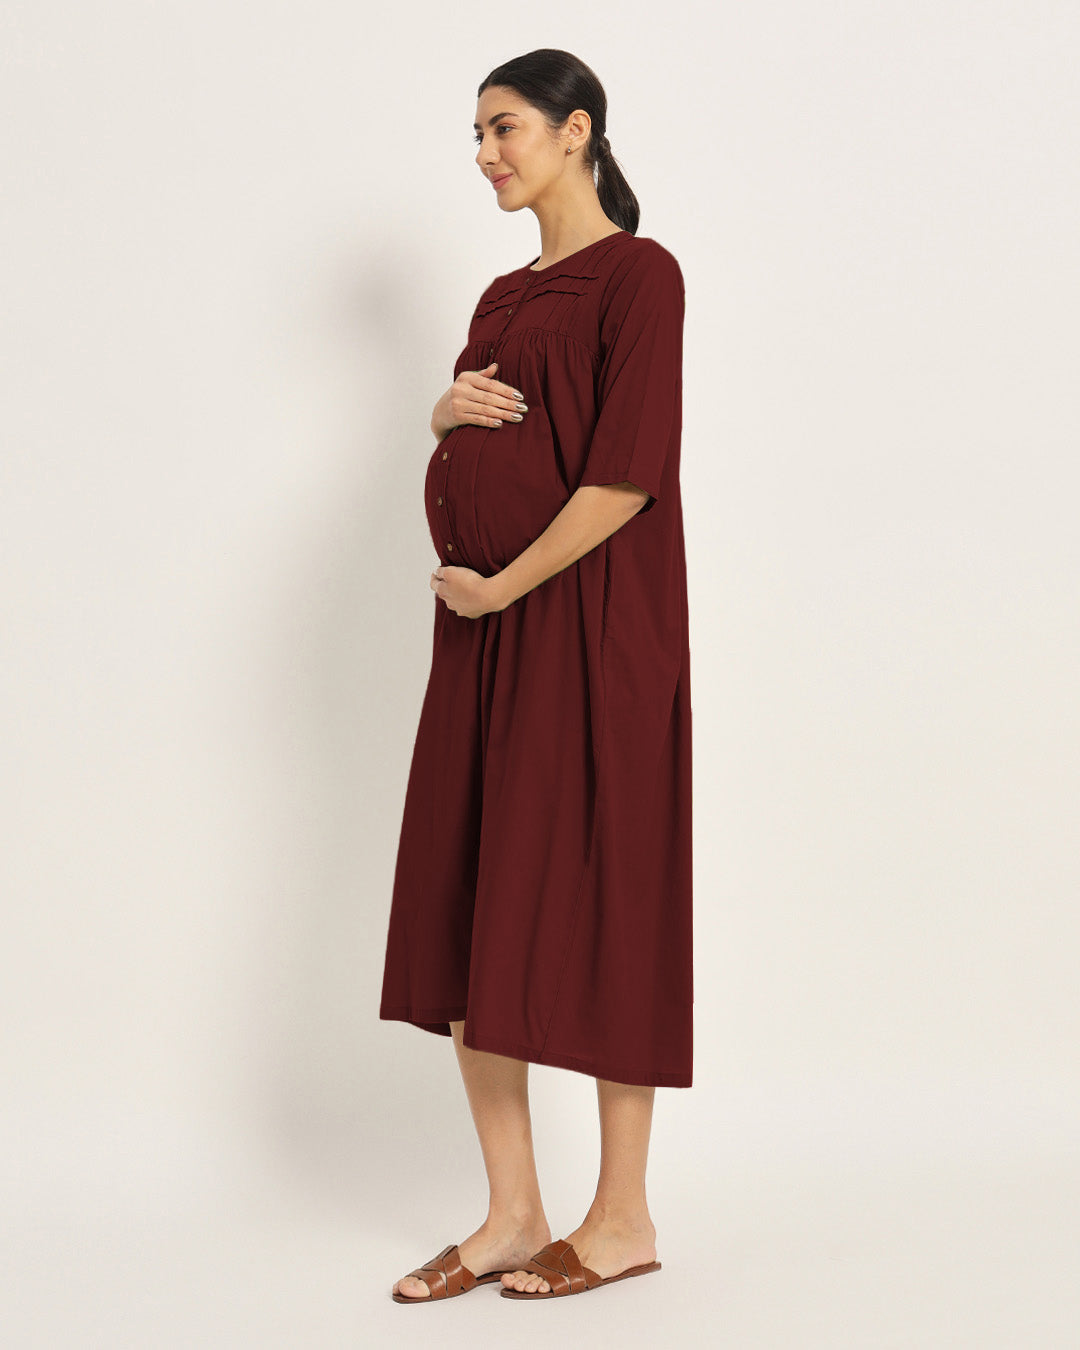 Combo: Iris Pink & Russet Red Mommy-to-Be Marvel Maternity & Nursing Dress